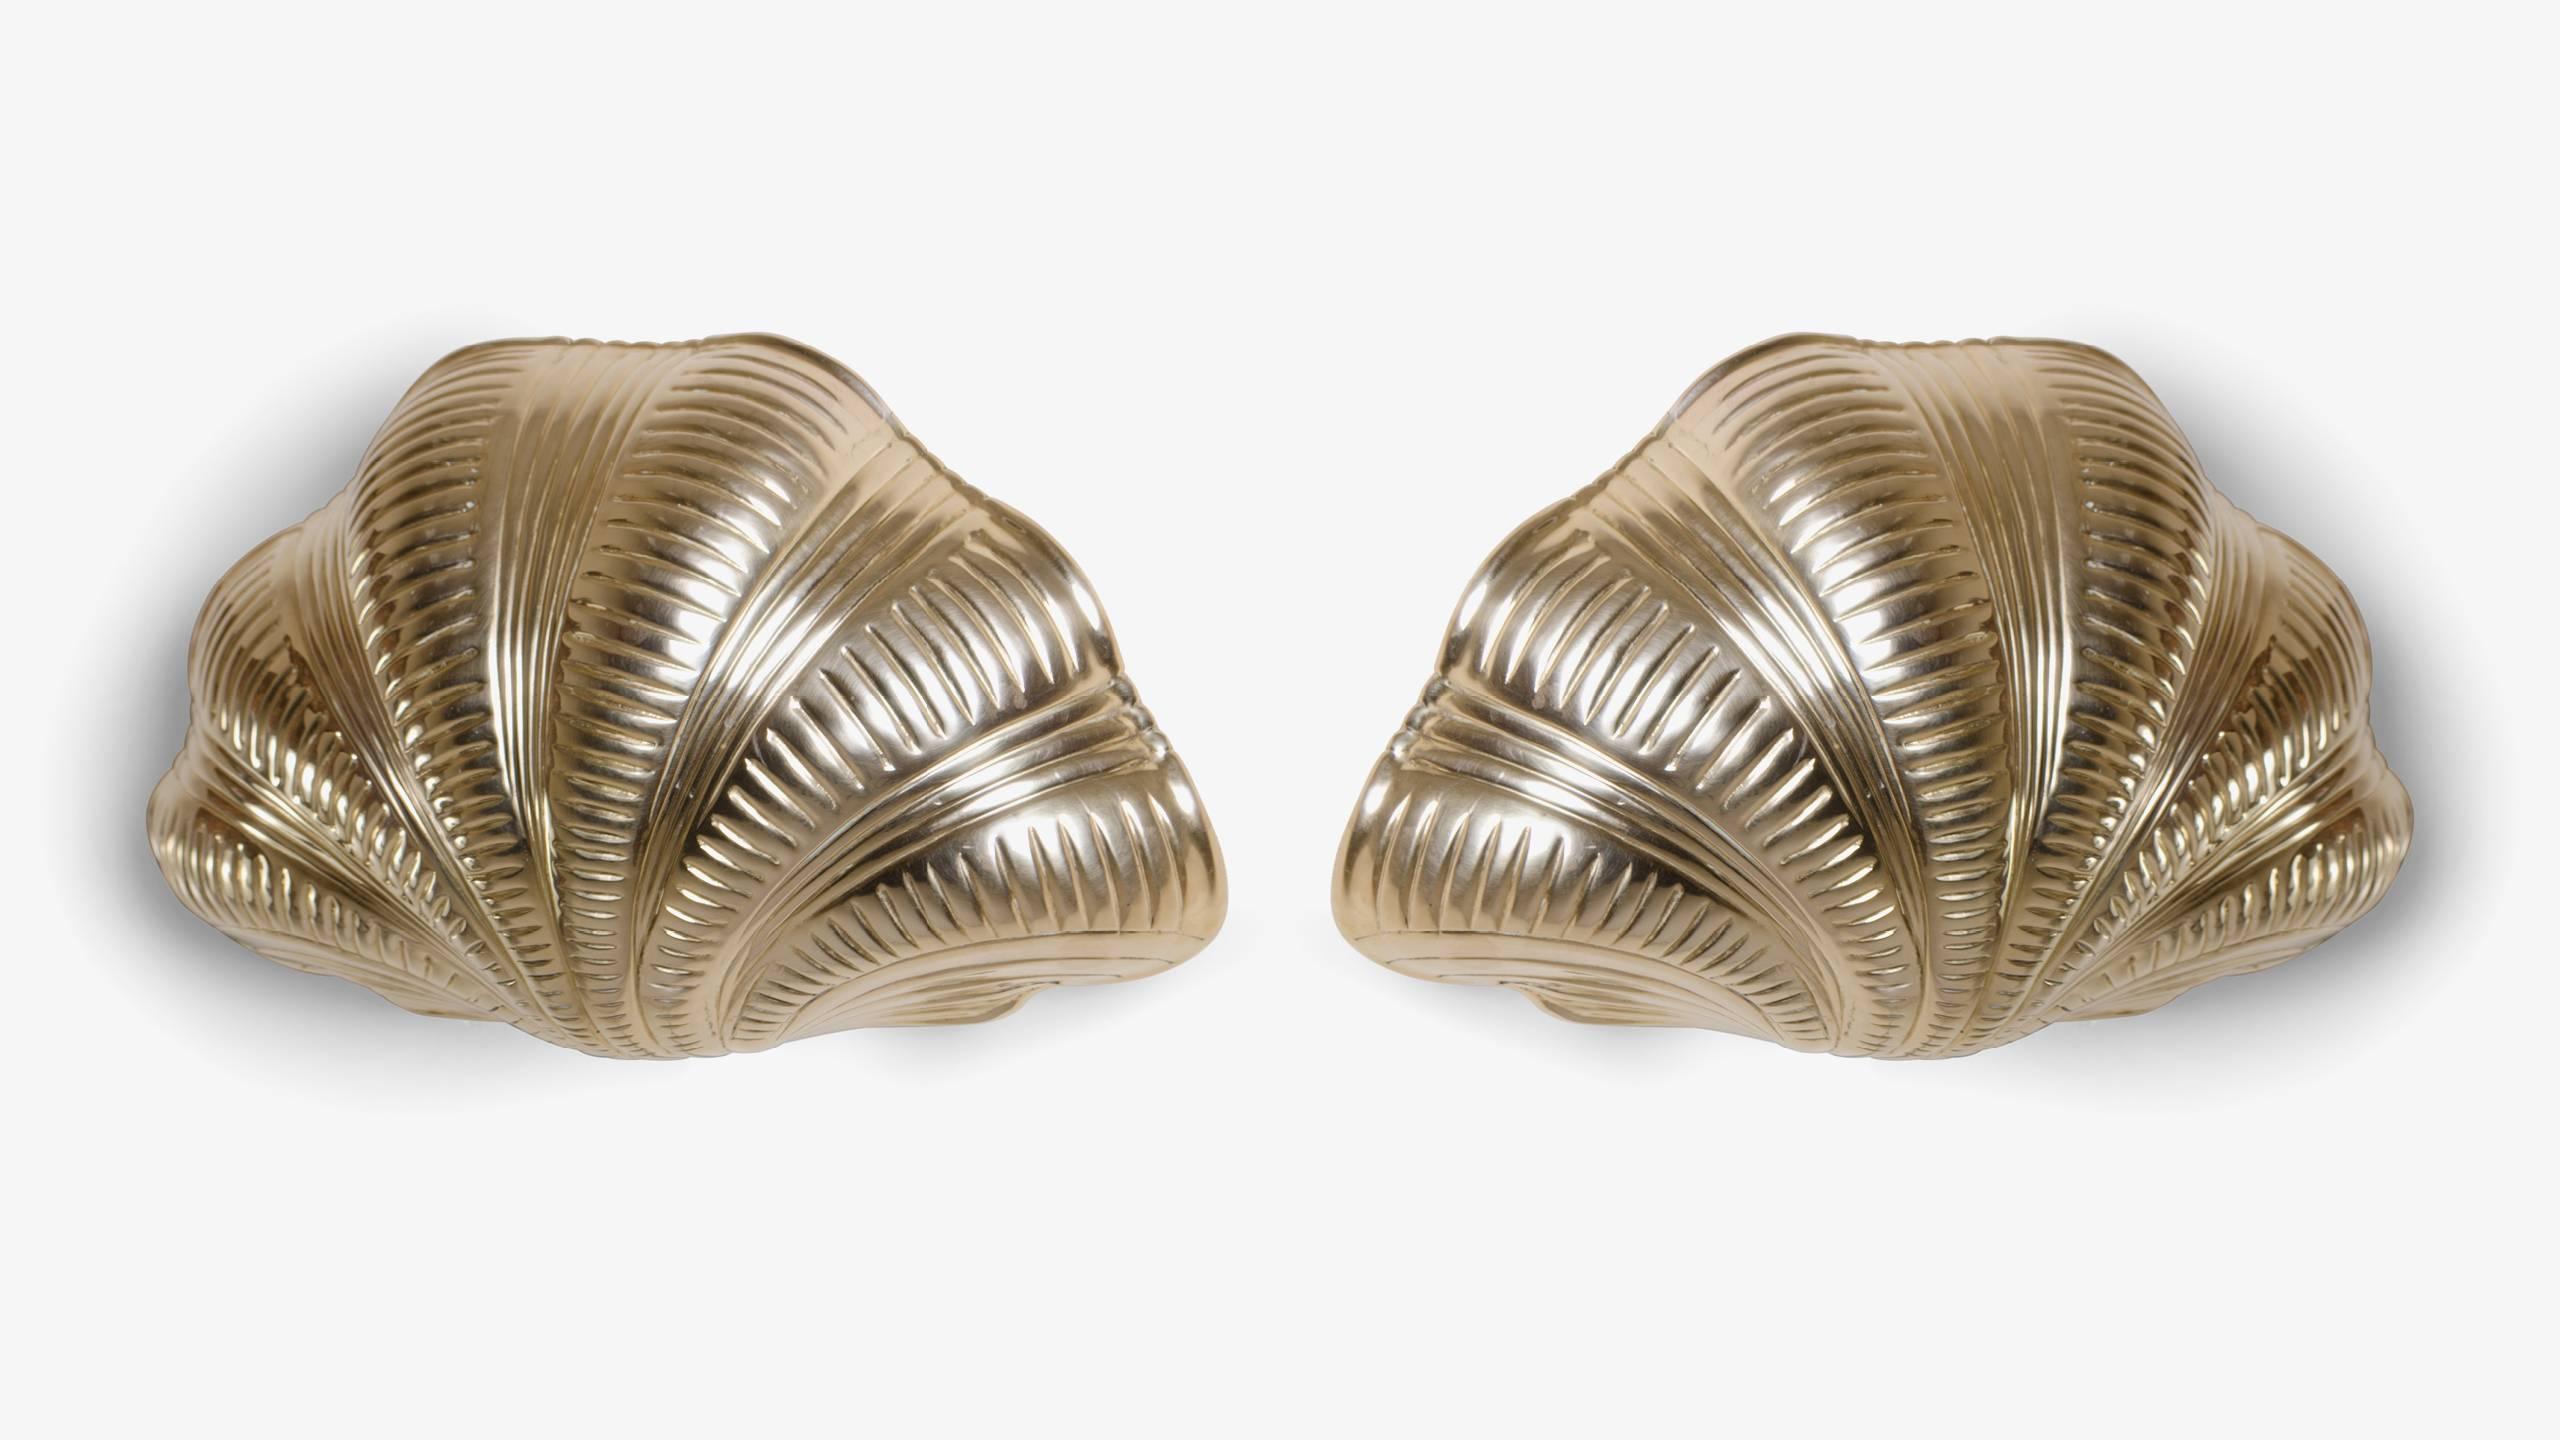 The excellence of Italian craftsmanship. A pair of artfully designed sconces from the Mid-Century, still in outstanding condition. Solid cast brass scallop motif forms are delicately engraved giving them a natural form. Mounted to a wall, the pair